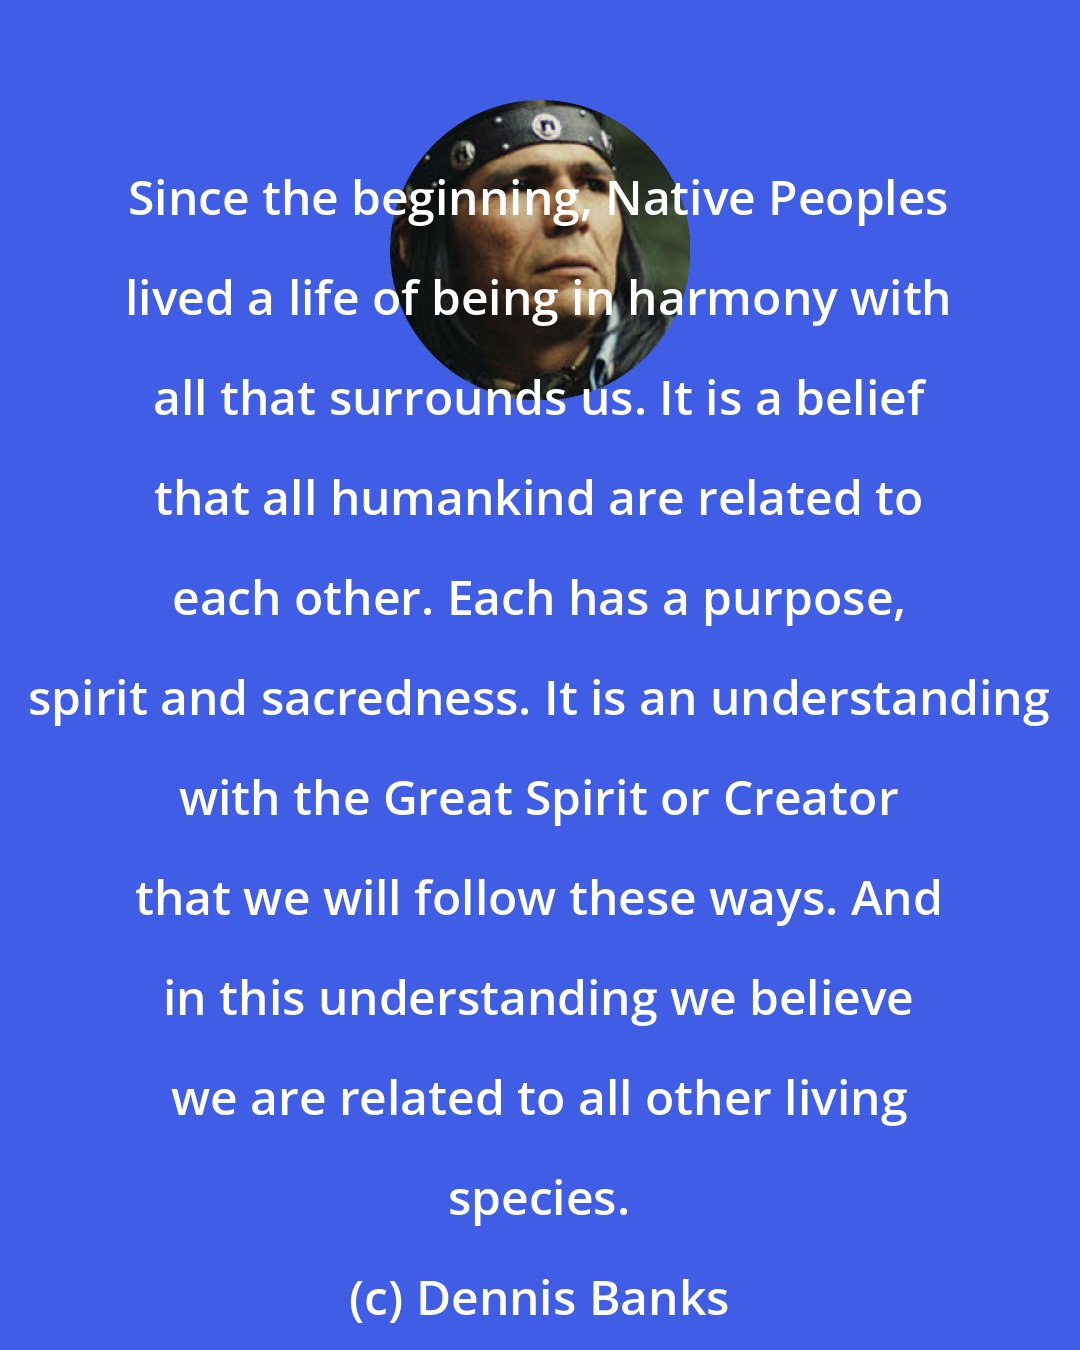 Dennis Banks: Since the beginning, Native Peoples lived a life of being in harmony with all that surrounds us. It is a belief that all humankind are related to each other. Each has a purpose, spirit and sacredness. It is an understanding with the Great Spirit or Creator that we will follow these ways. And in this understanding we believe we are related to all other living species.